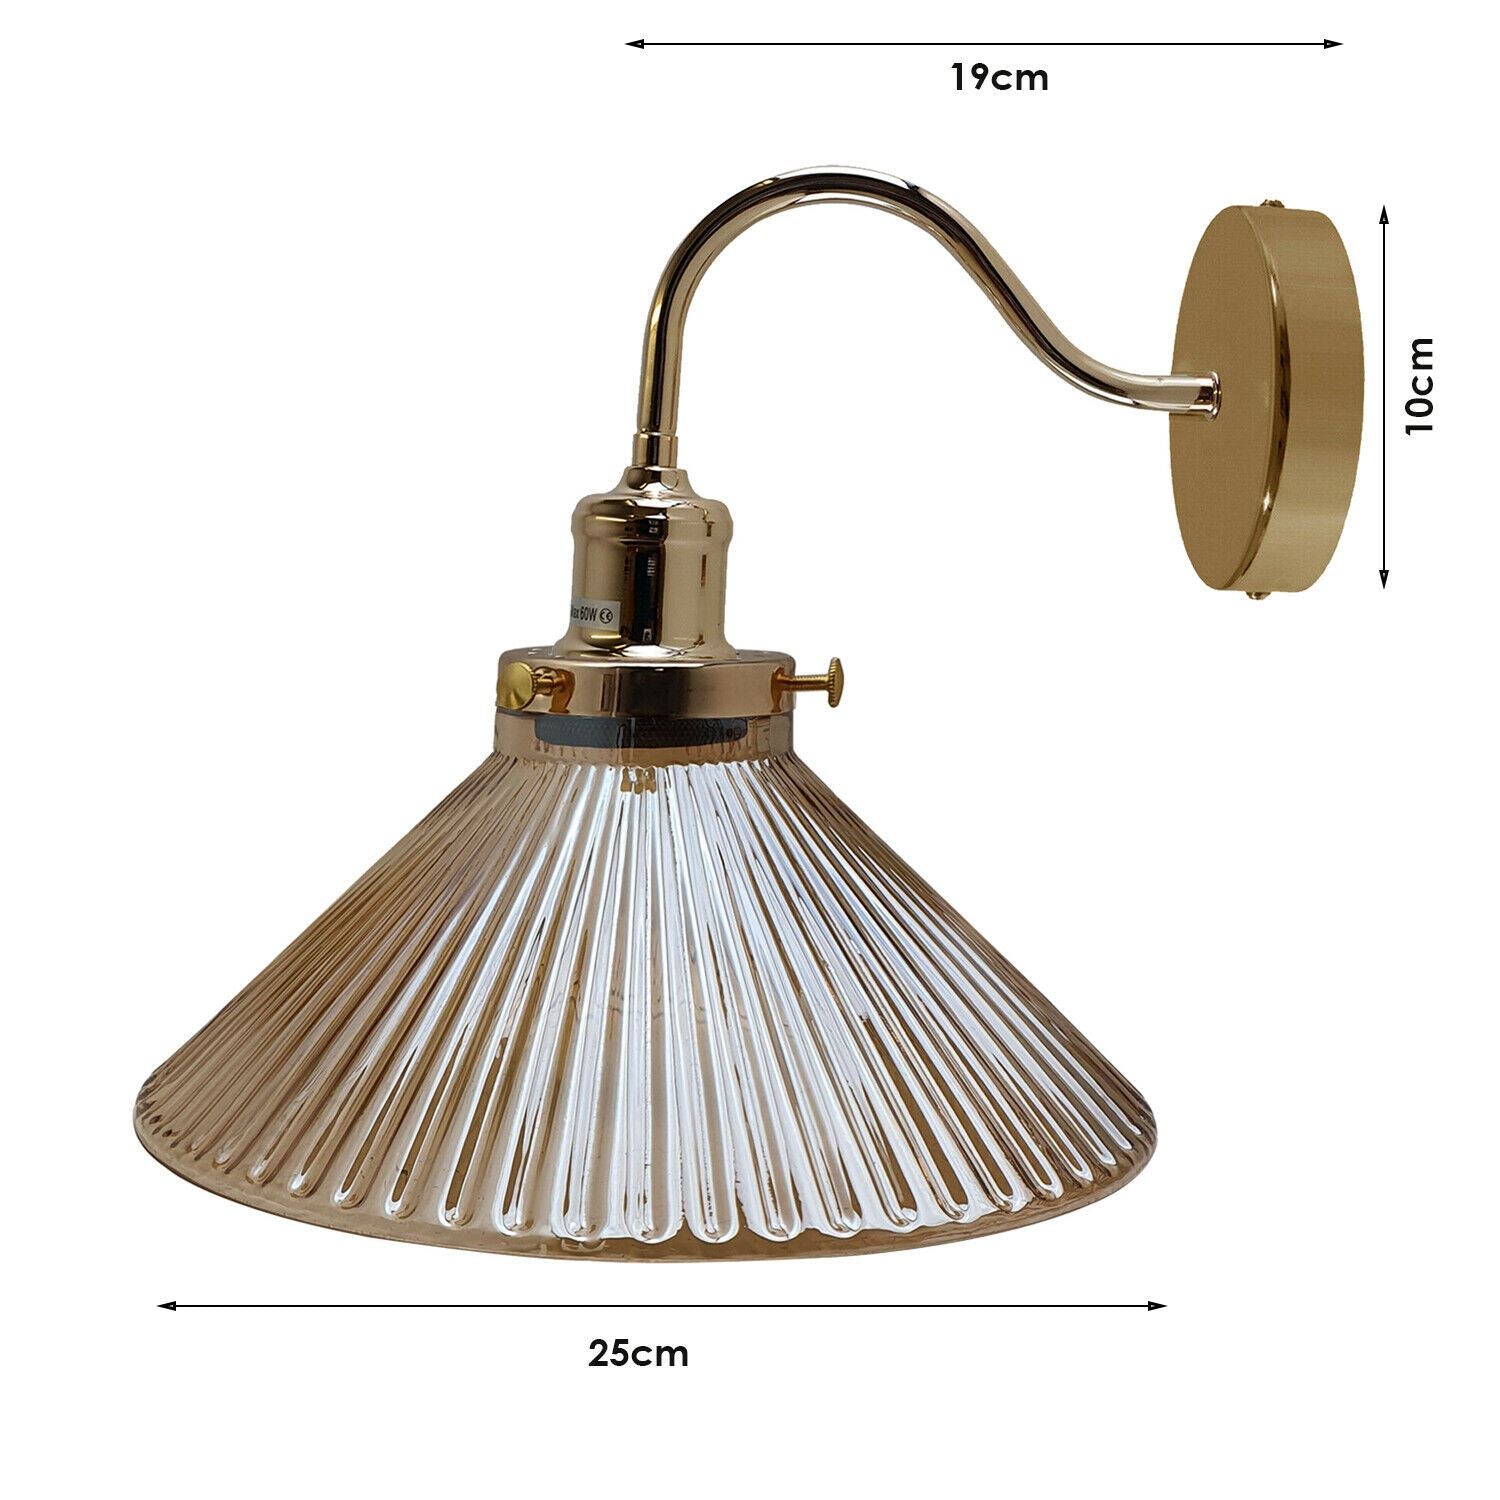 Vintage Wall Light Industrial Lighting Retro Metal Wall lamp Indoor Home Lights Fixture with Glass Shade Cover~1274 - LEDSone UK Ltd